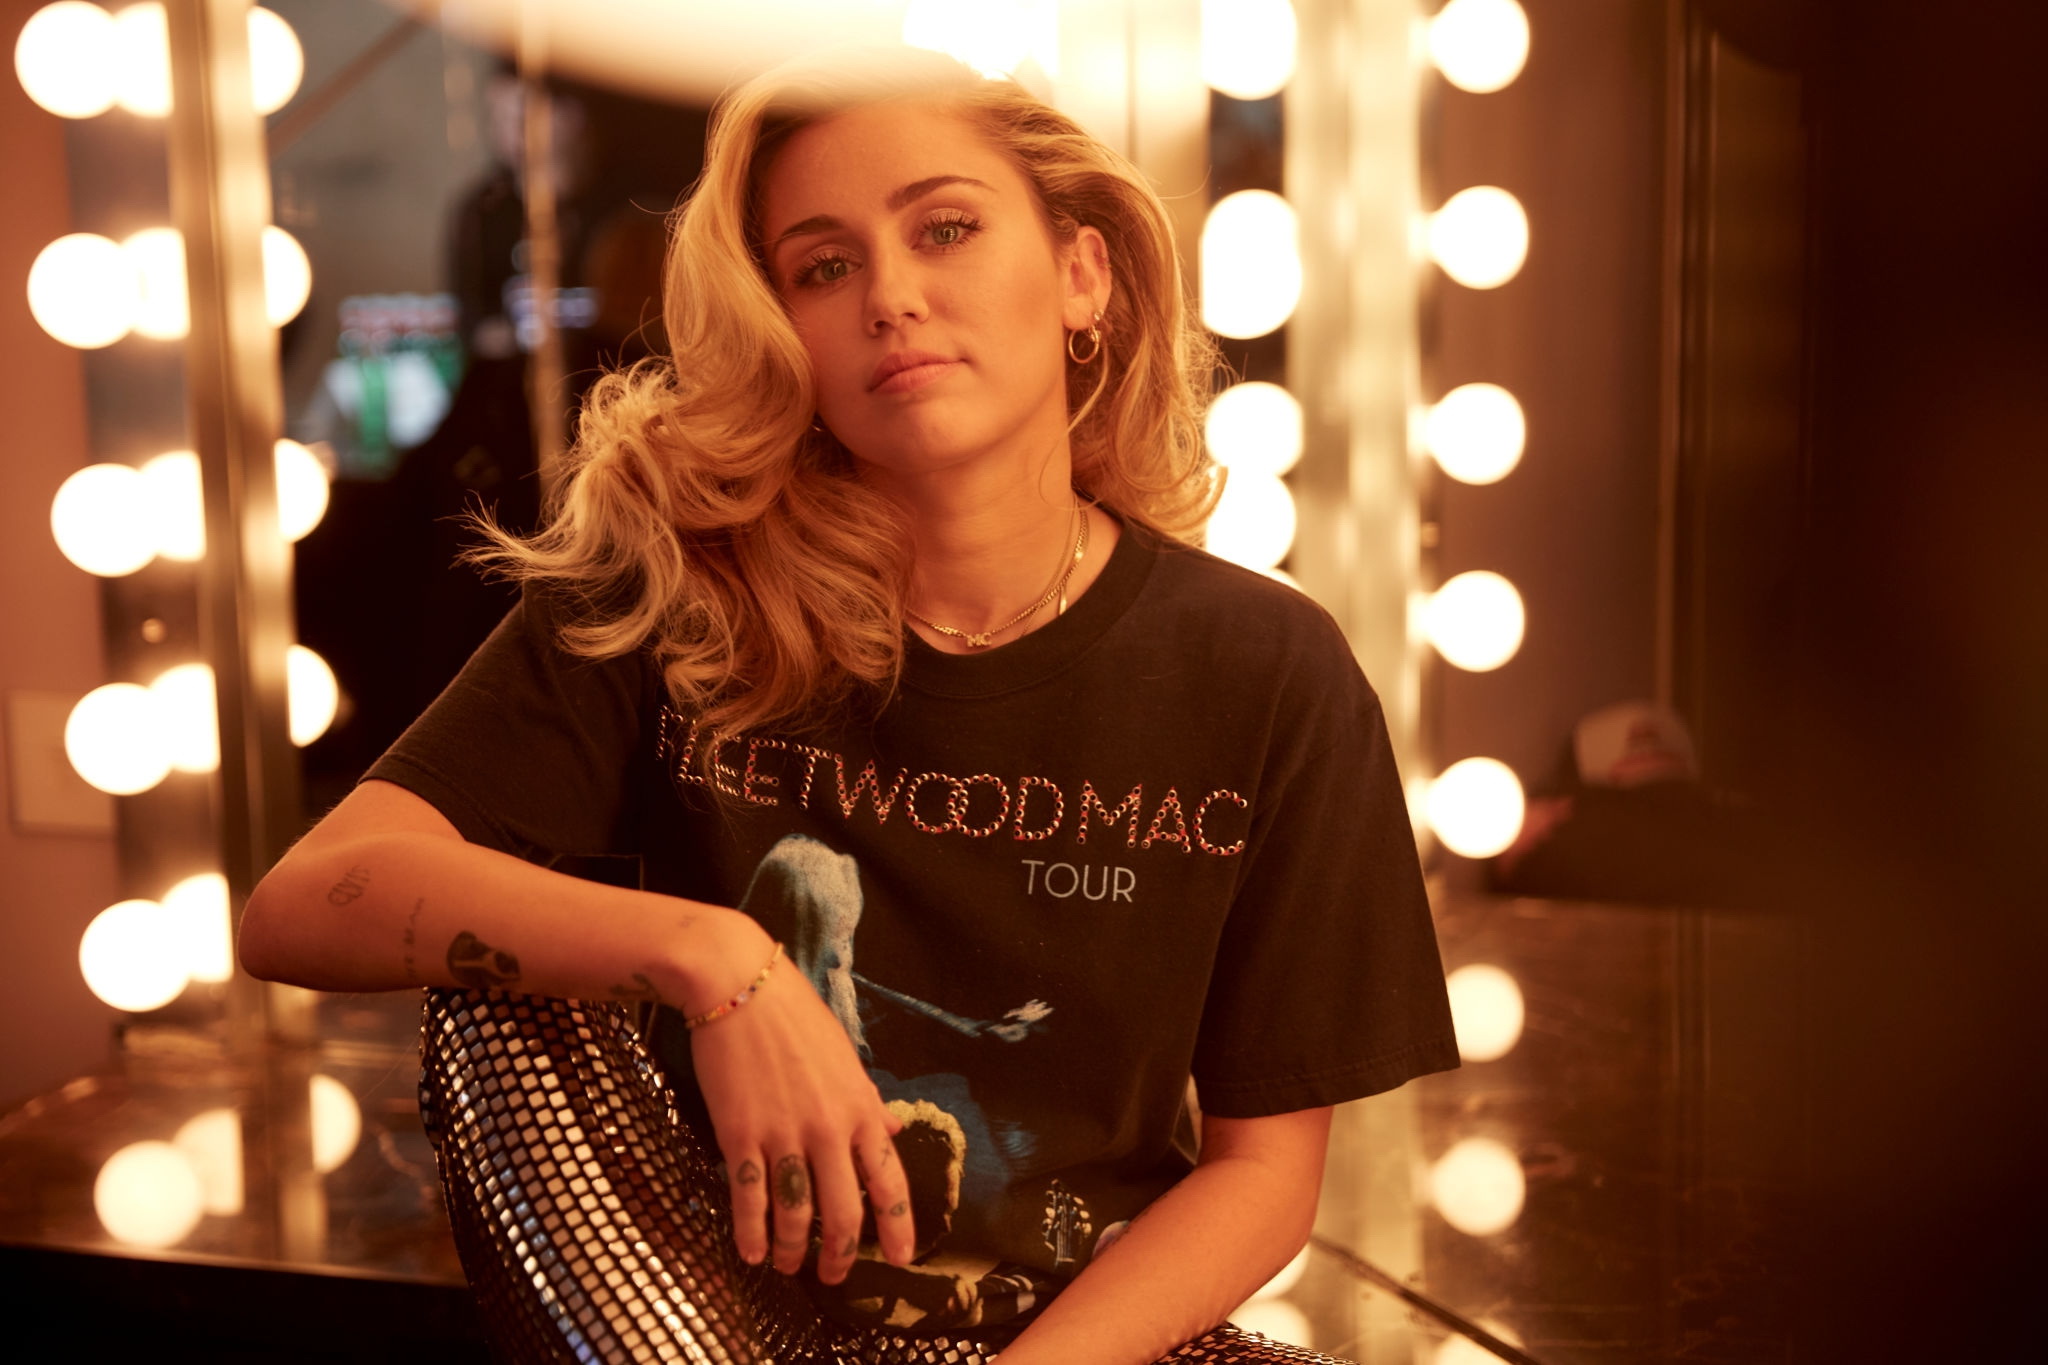 Miley Cyrus MusiCares Person of the Year Photoshoot 2018 Wallpapers